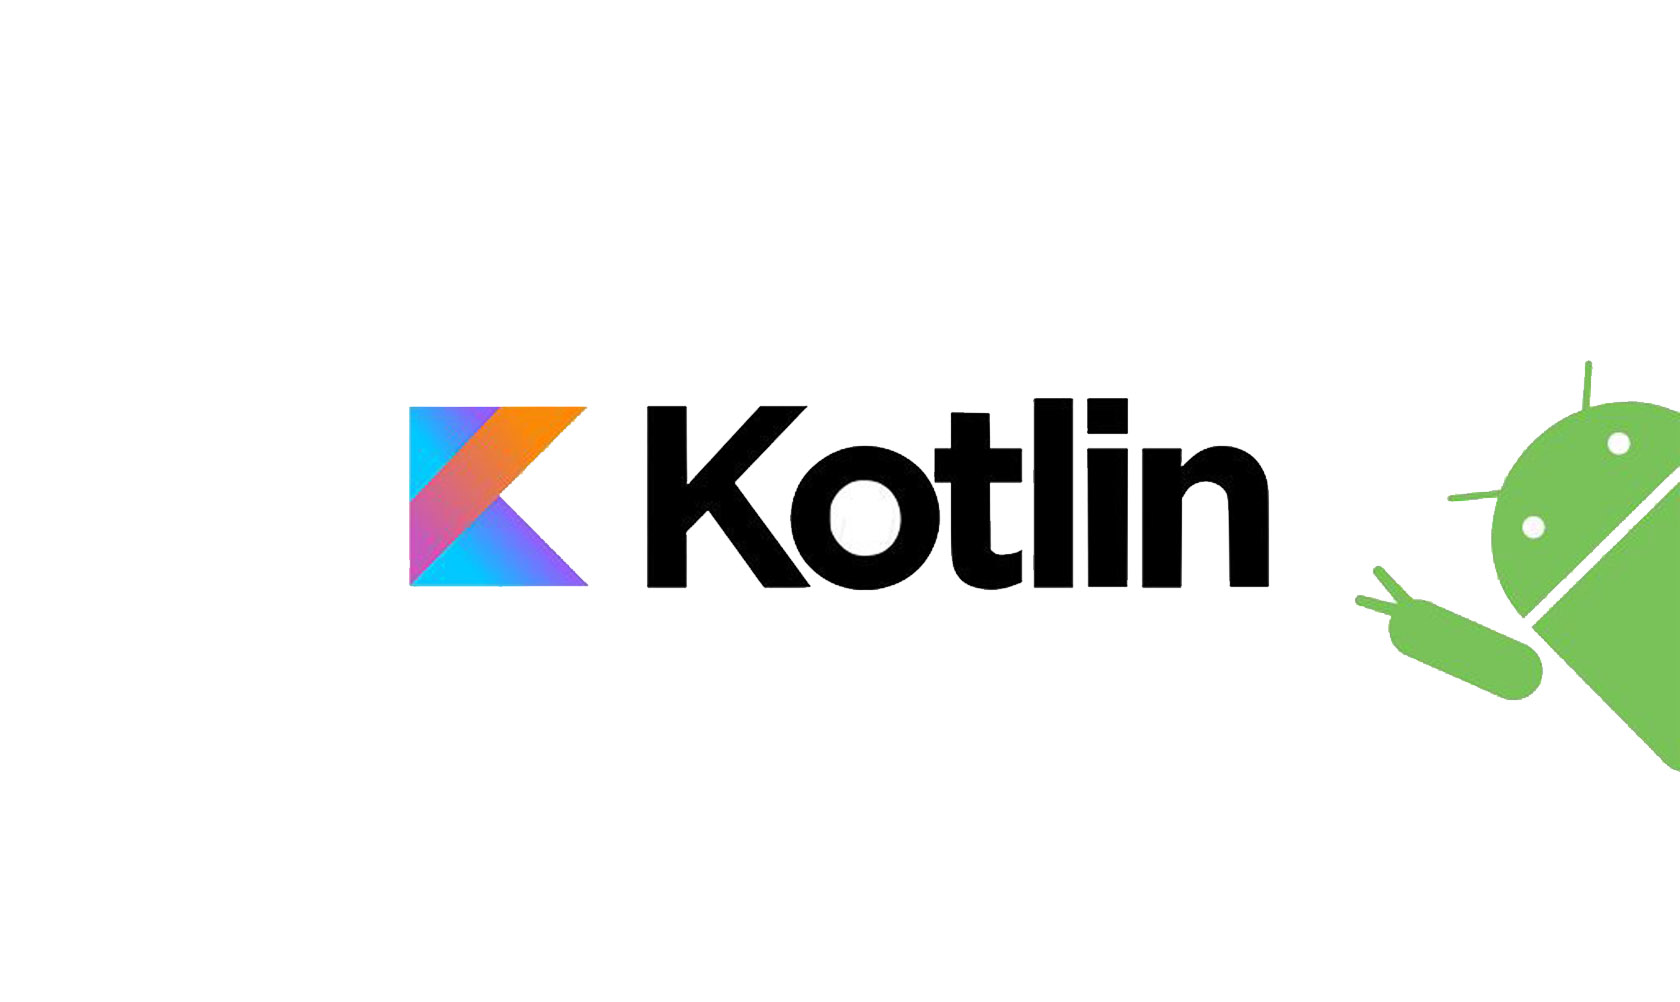 kotlin and android